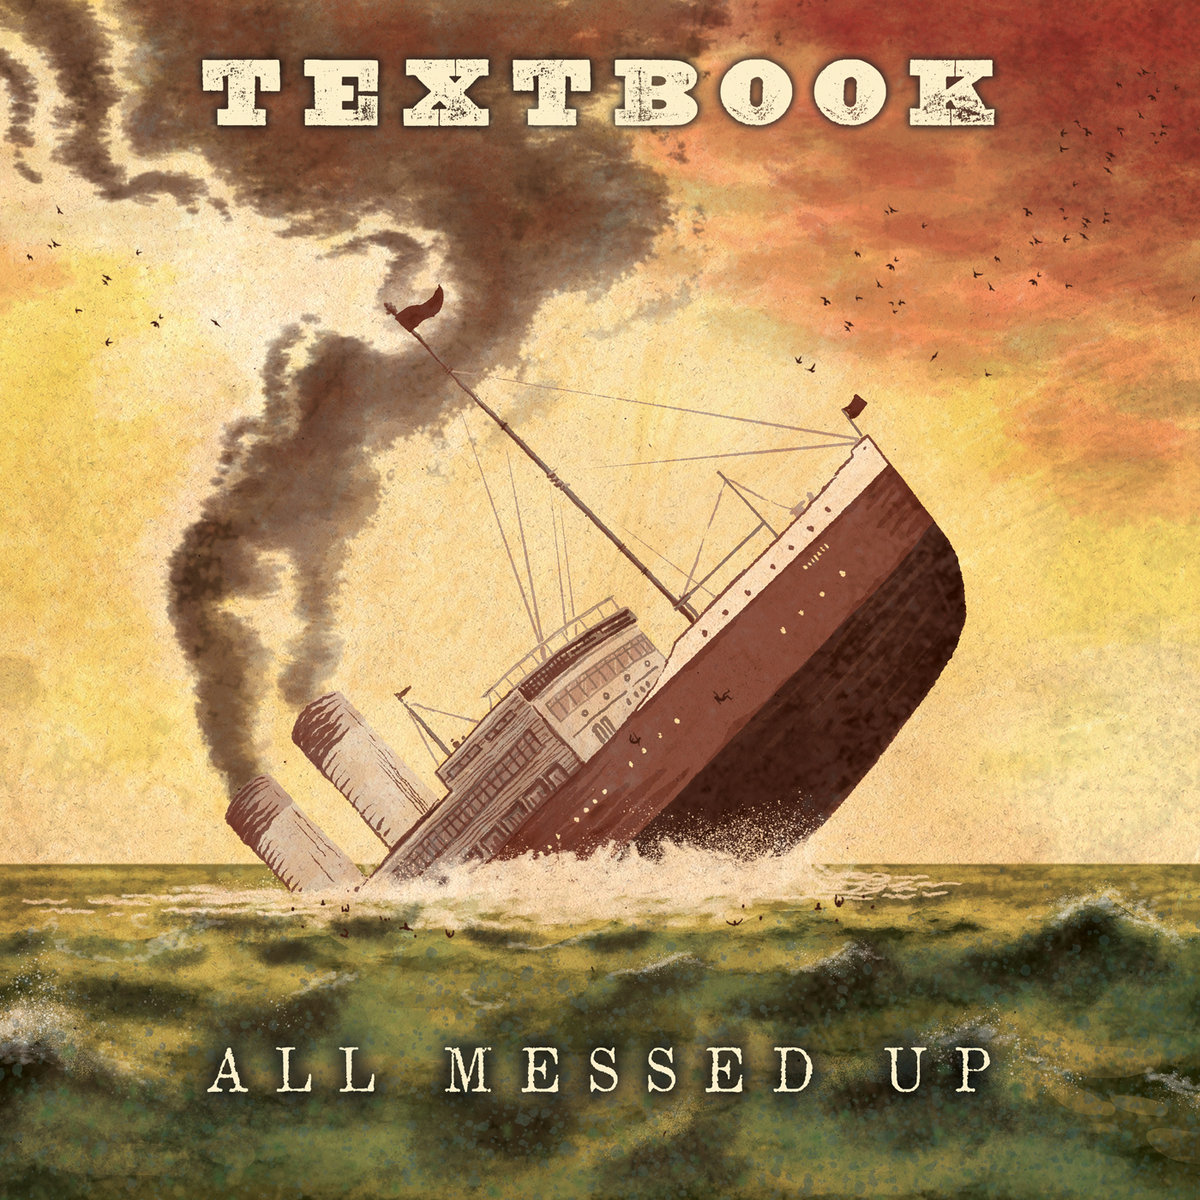 Song of The Week: “Looking After Me” by Textbook